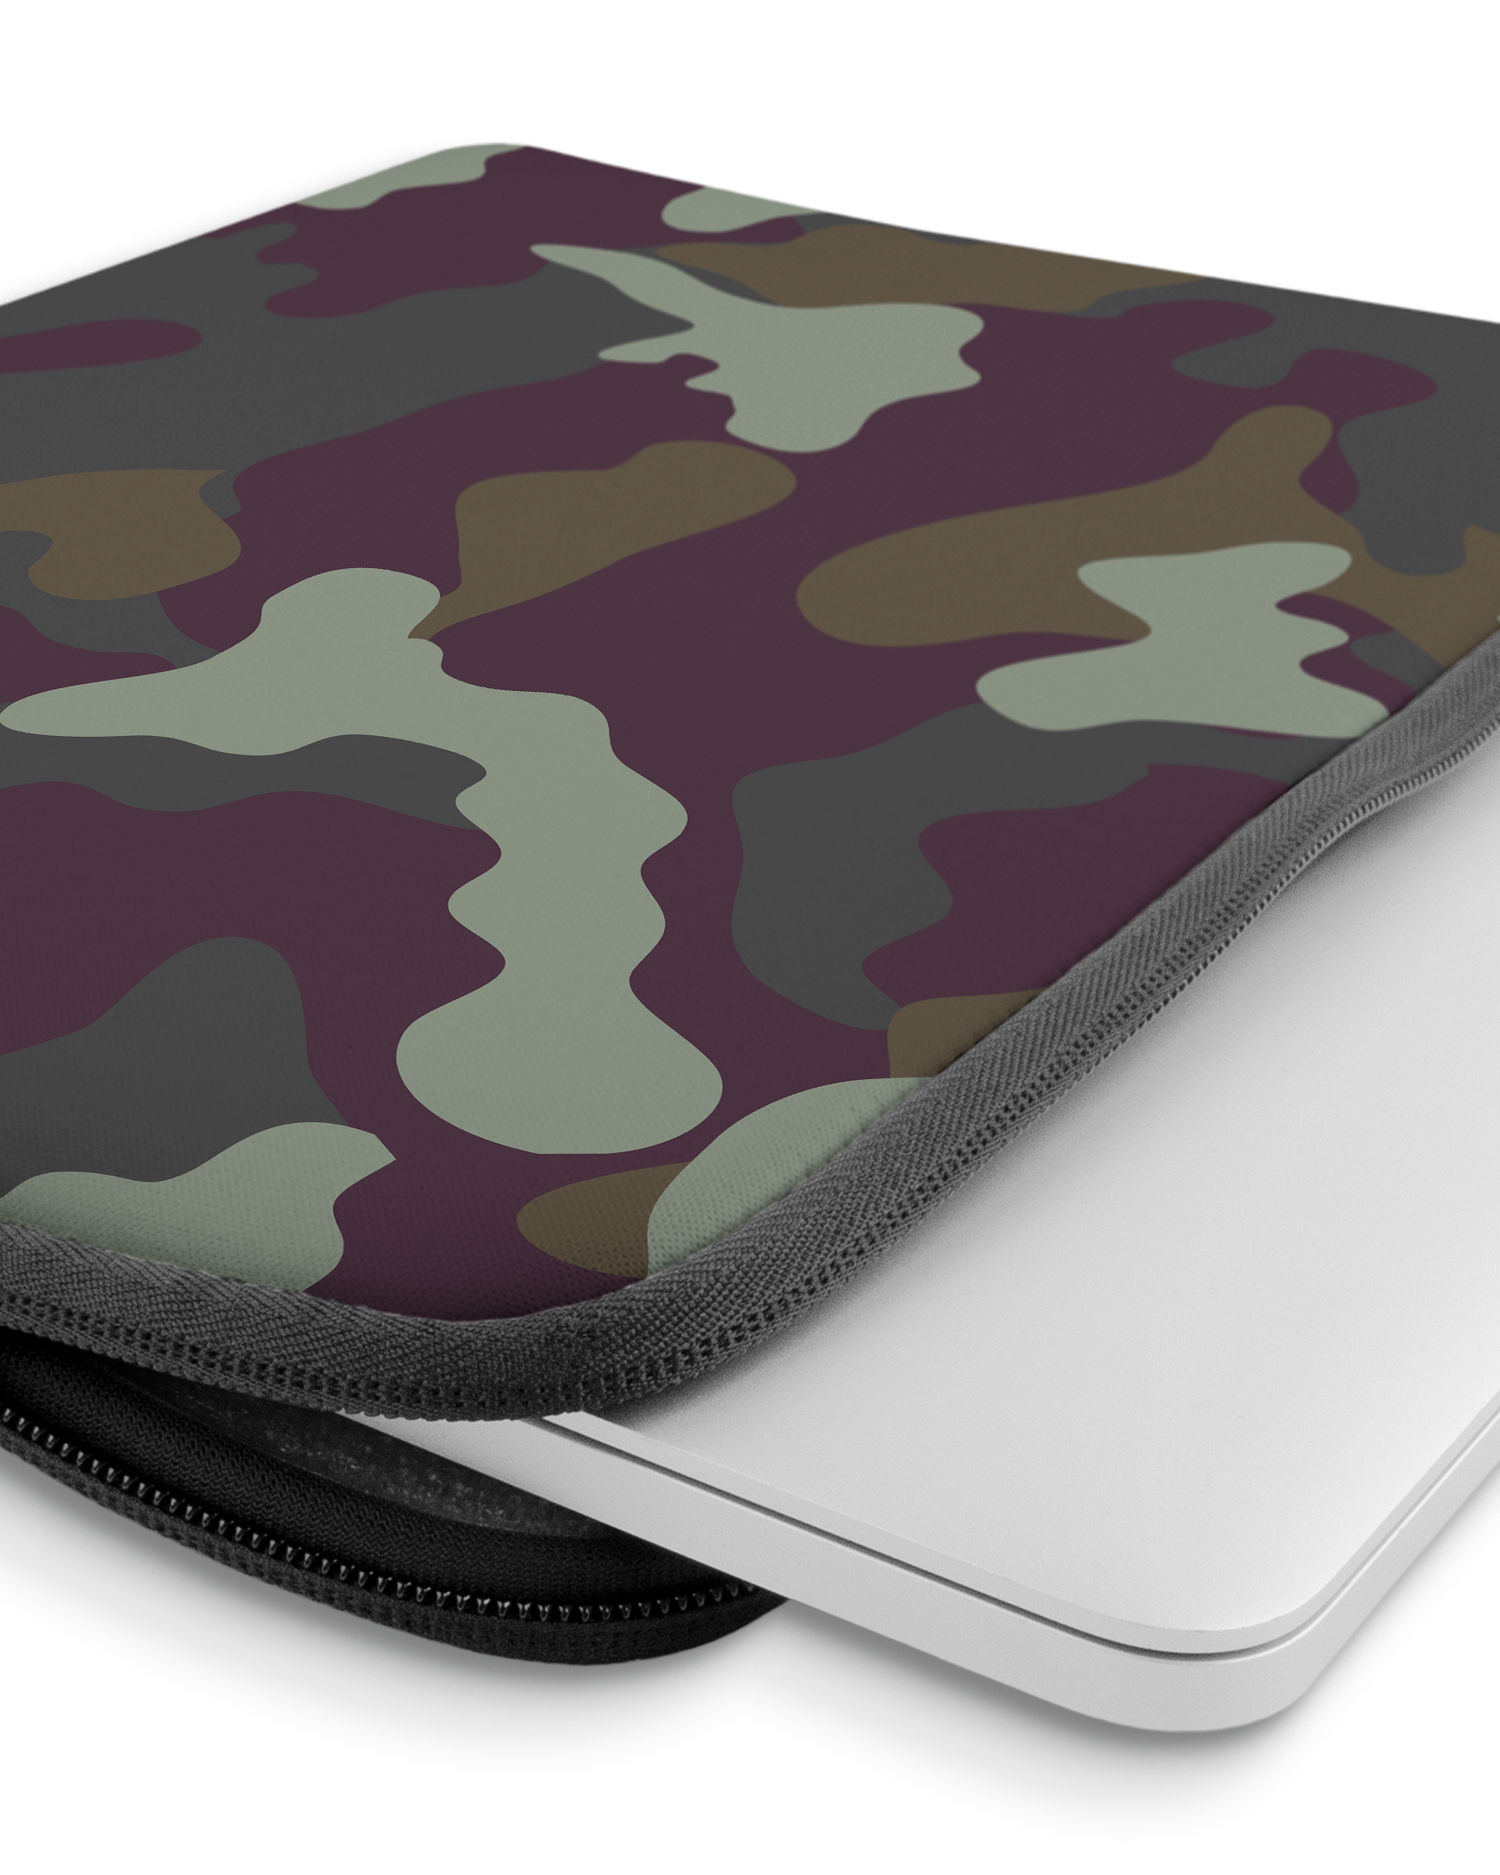 Night Camo Laptop Case 14 inch with device inside